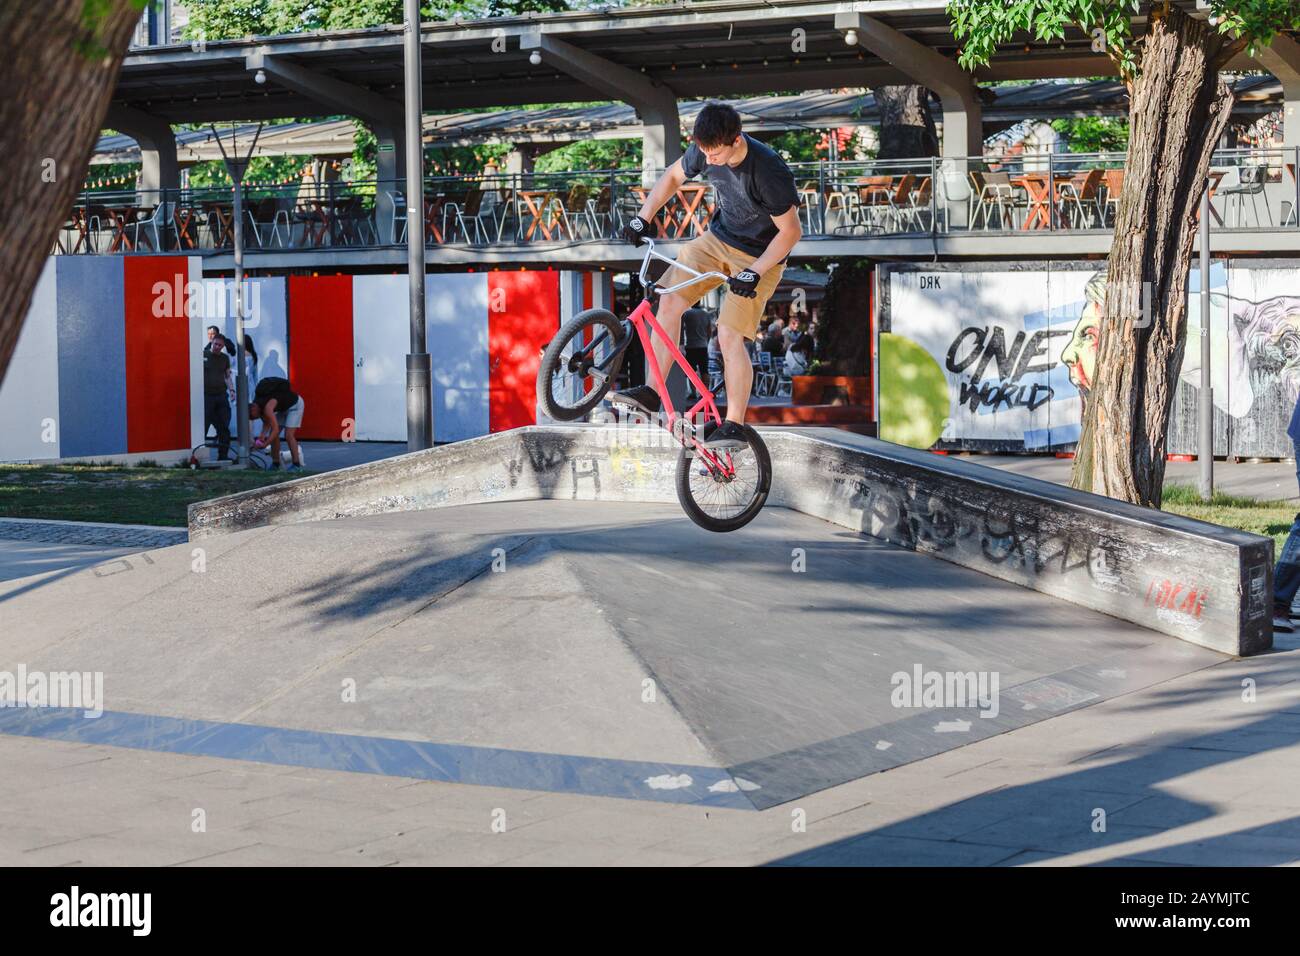 13 MAY 2018, BUDAPEST, HUNGARY: Man performs a stunt with bmx bicycle at  the ramp on a skatepark in the city park Stock Photo - Alamy